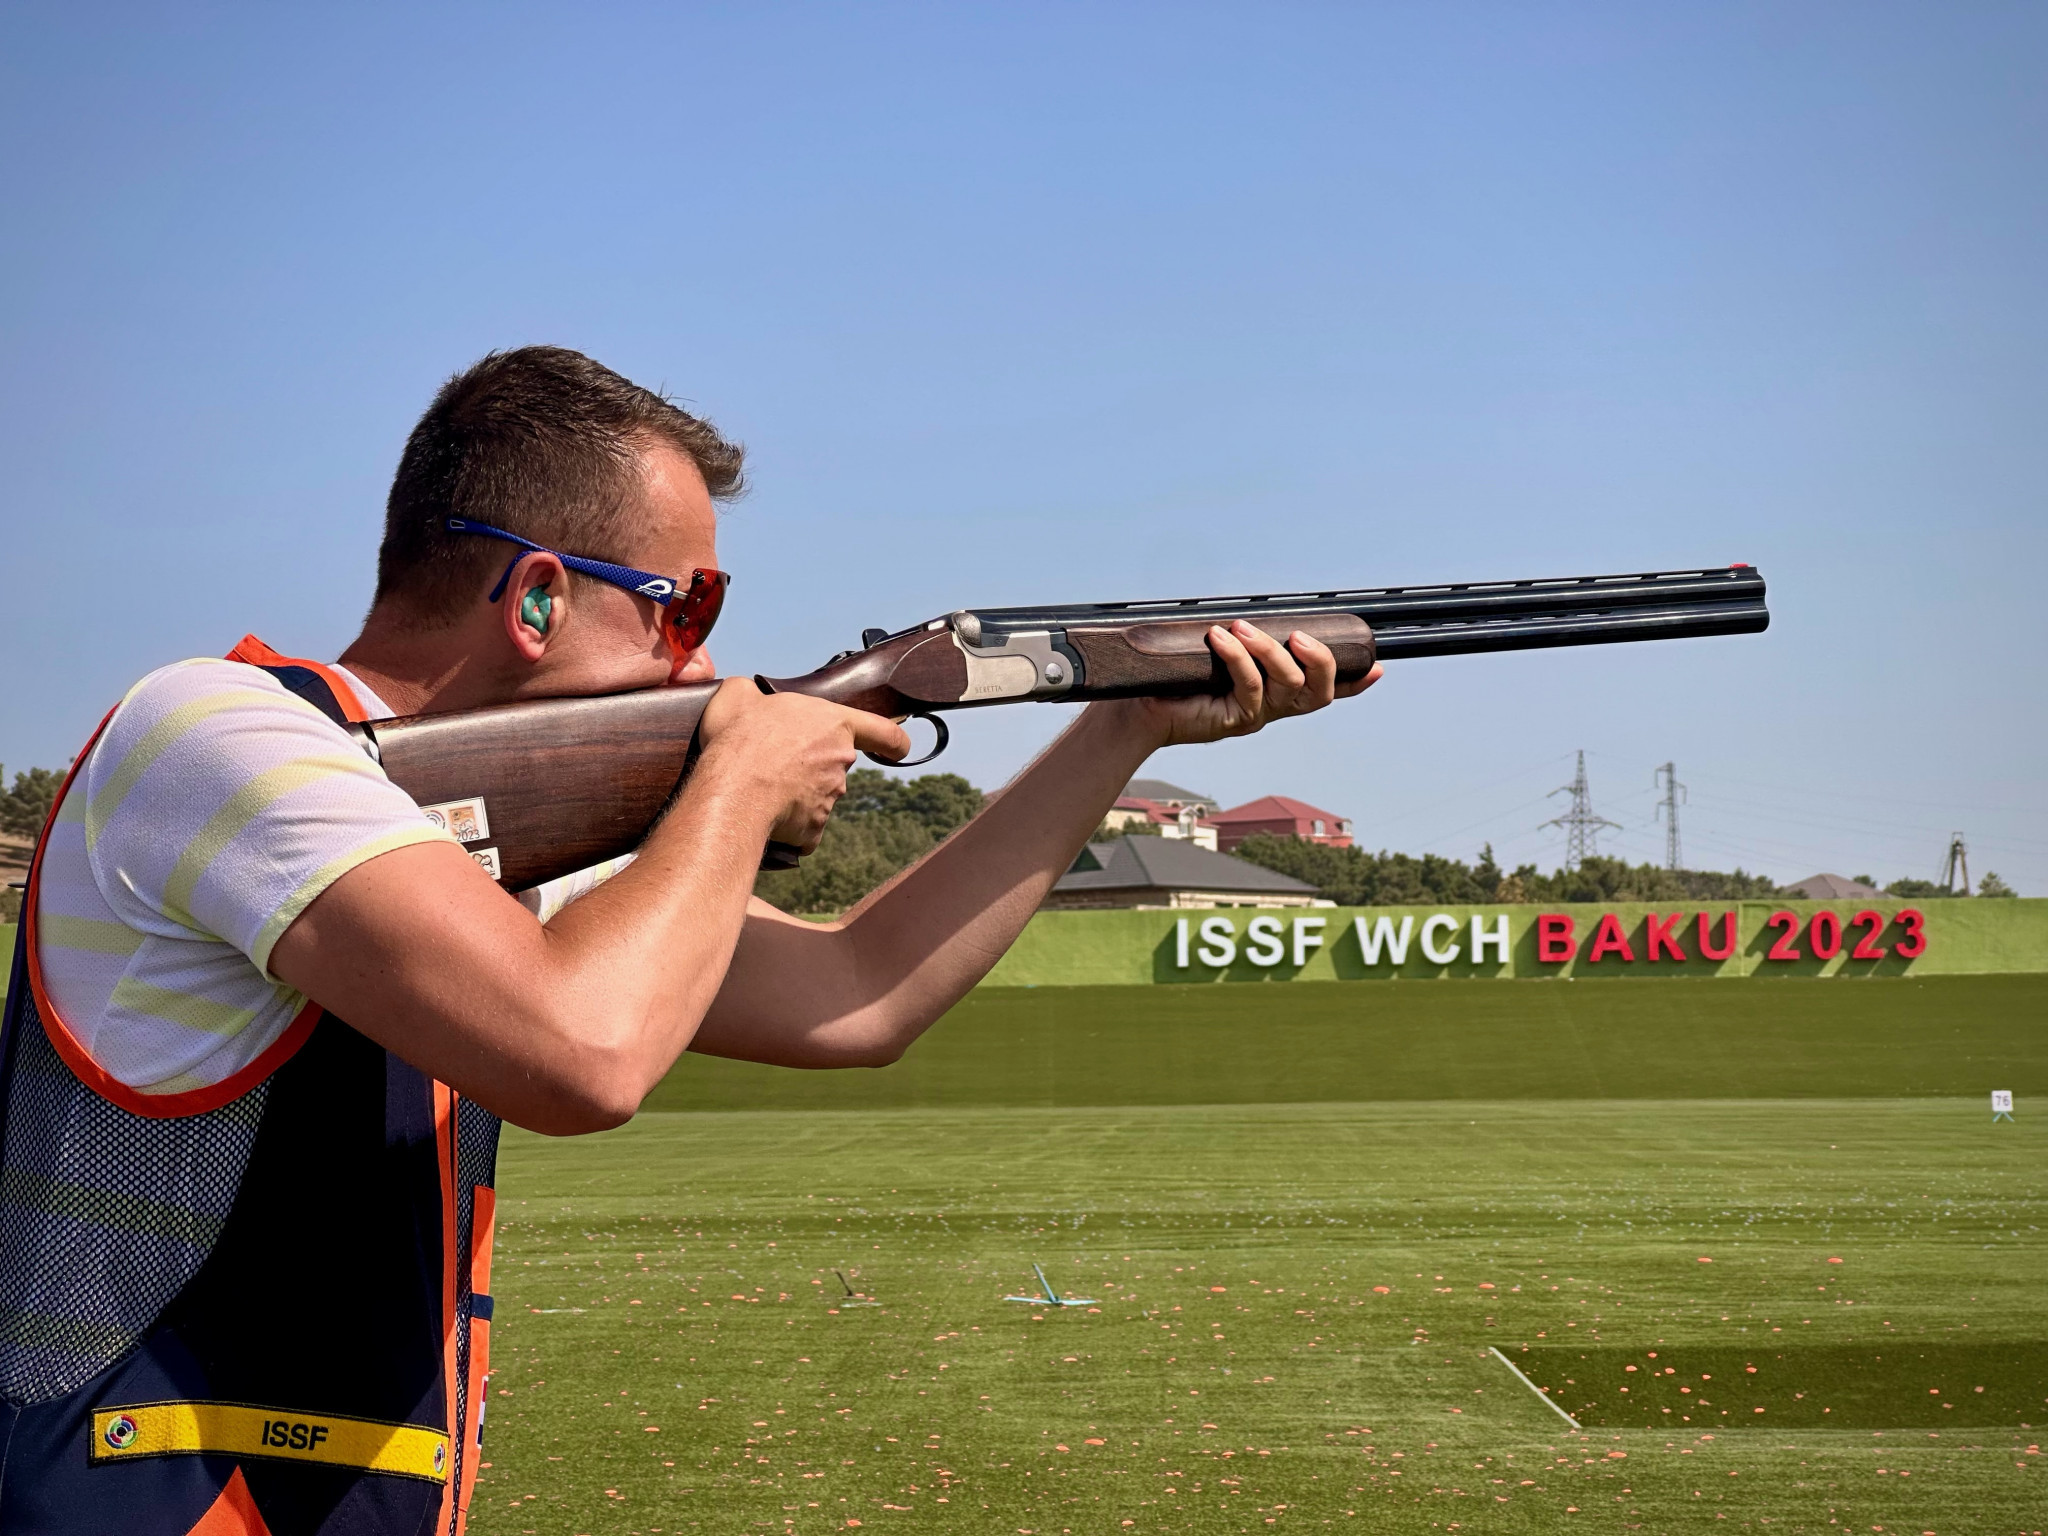 The Netherlands skeet shooter Tobias Haccou demonstrated his skill with a different kind of shooting as he took this picture of team mate Jan-Cor Van der Greef in Baku © Tobias Haccou